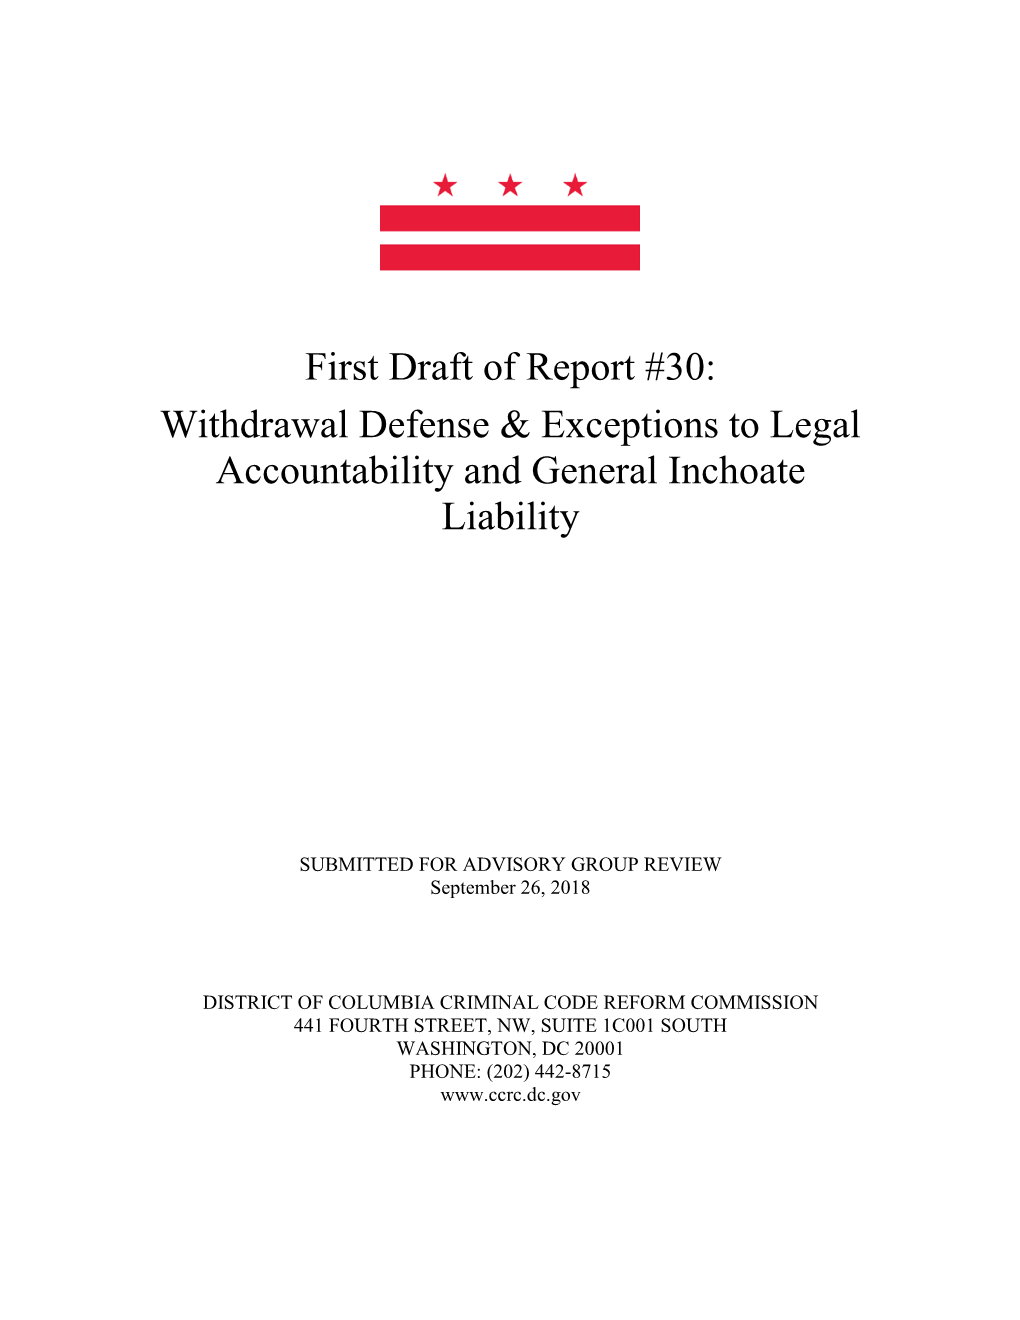 First Draft of Report #30: Withdrawal Defense & Exceptions to Legal